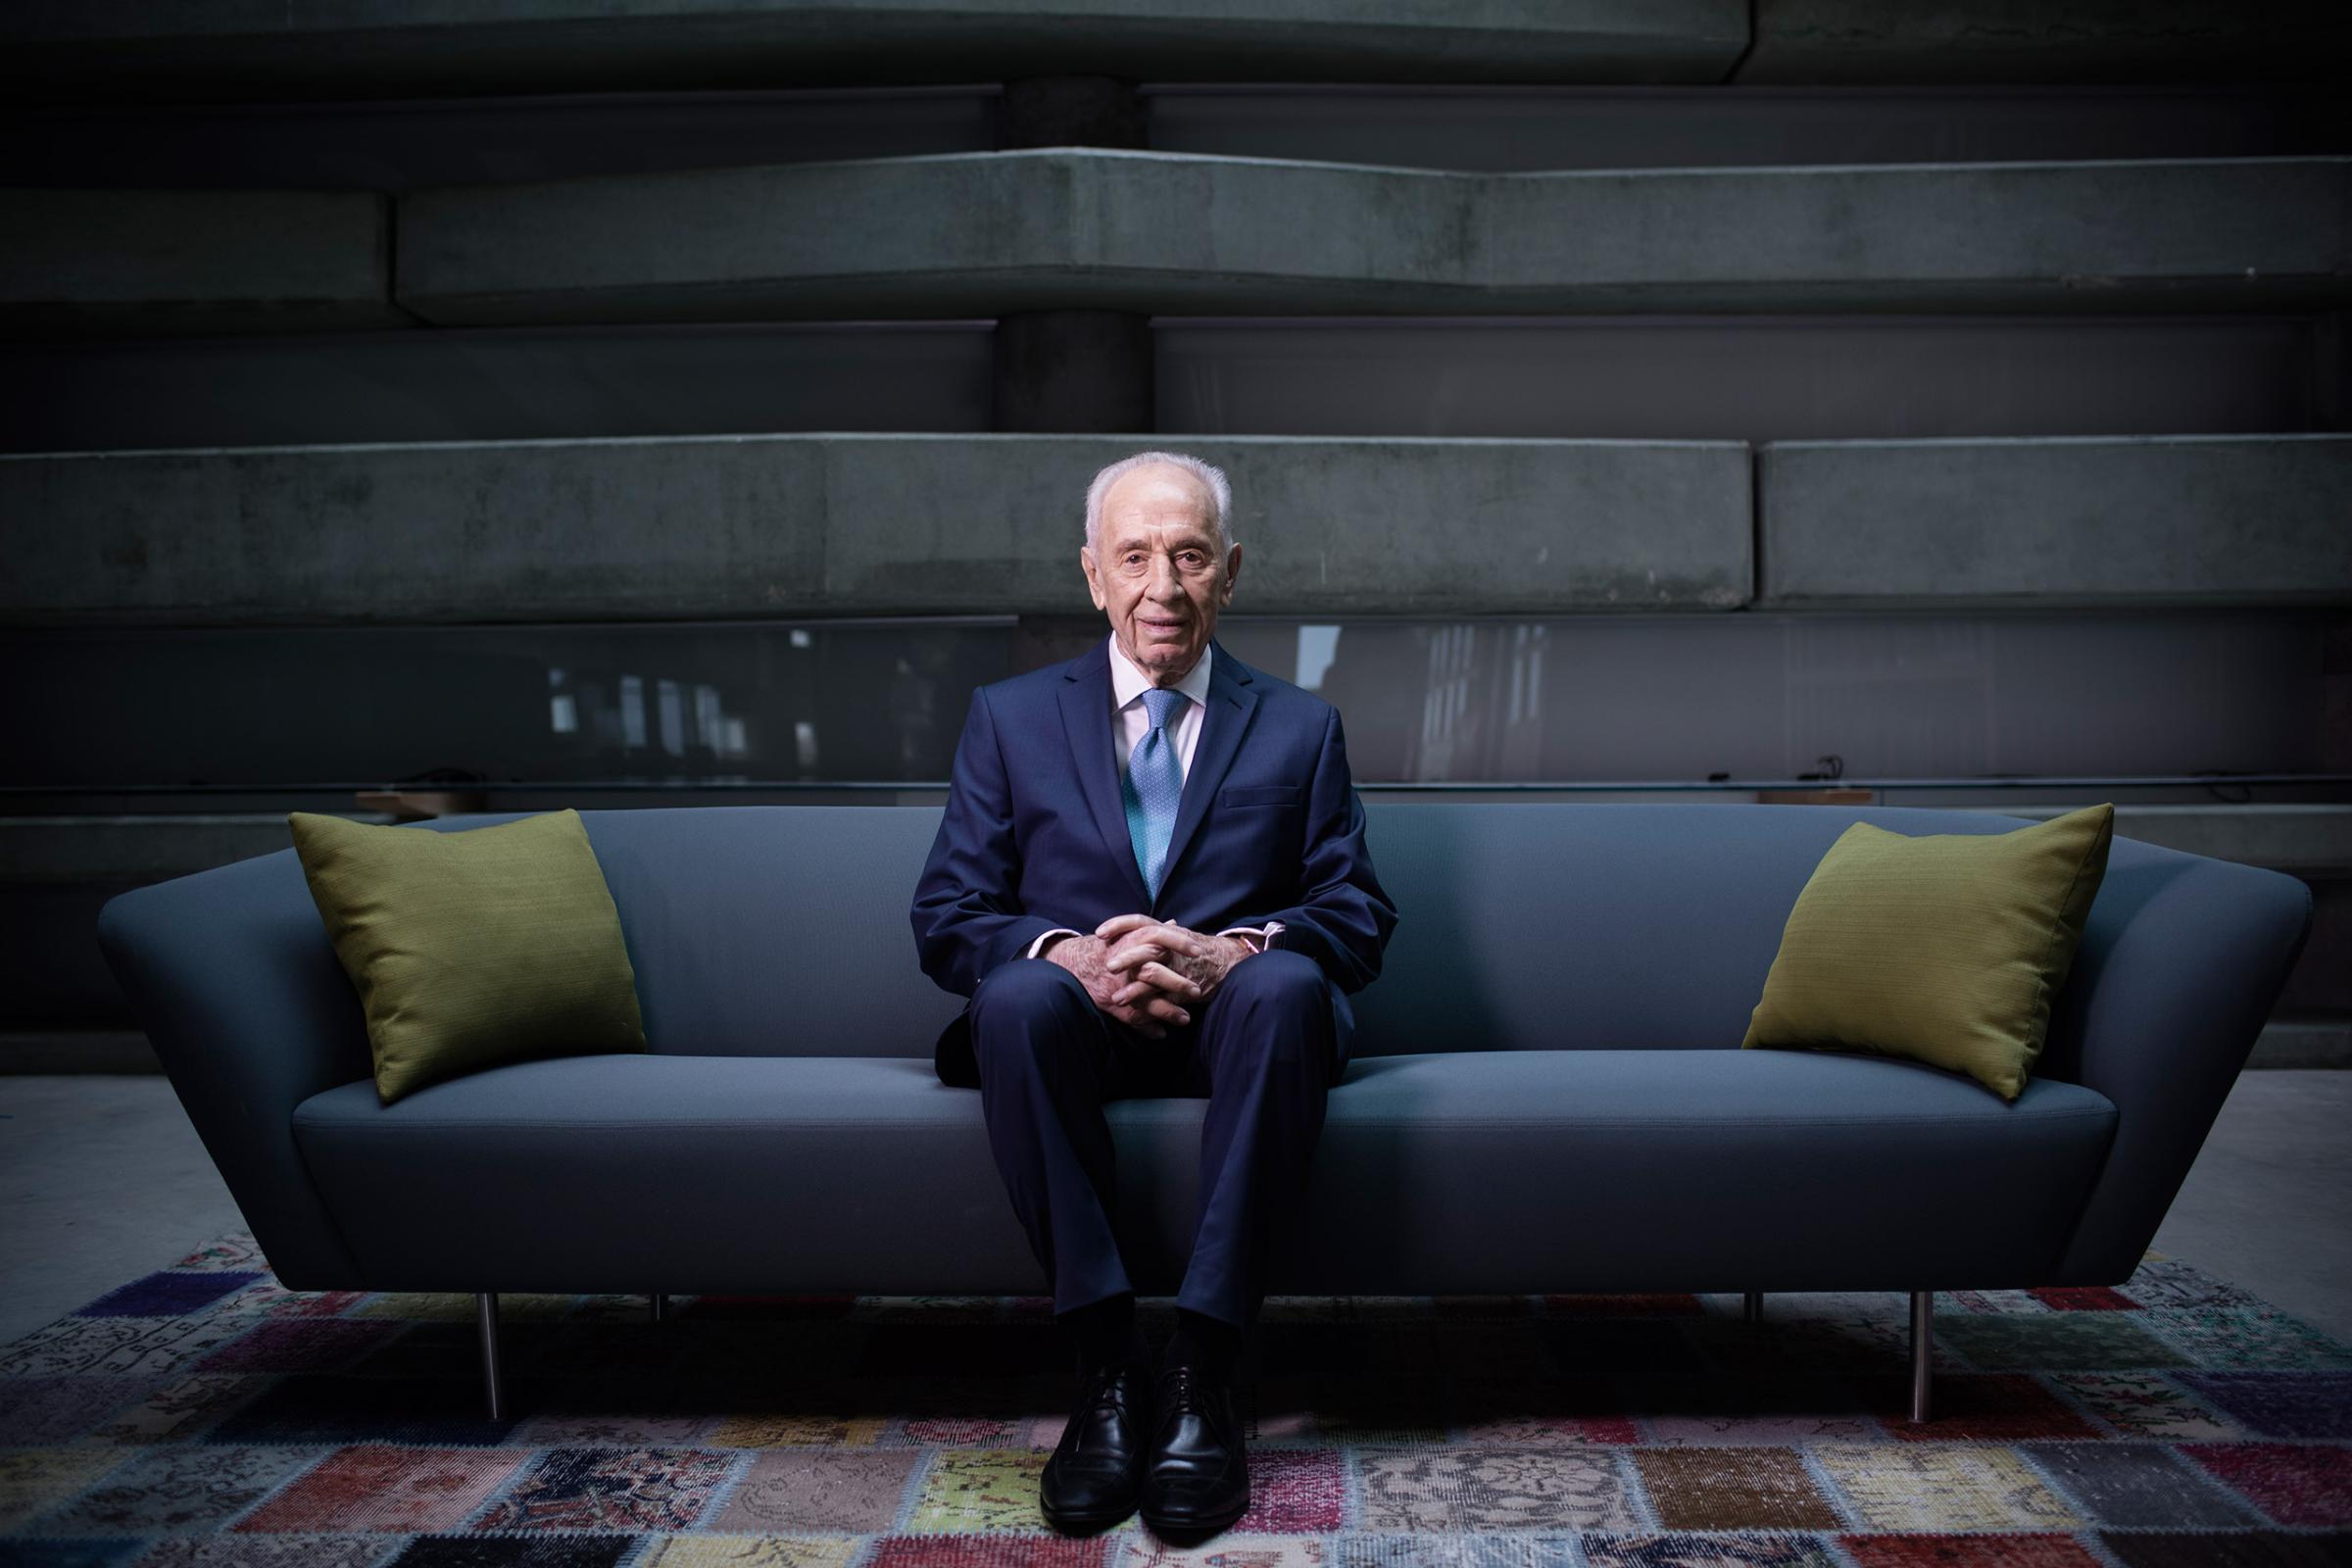 Shimon Peres, former Israeli President and Prime Minister, sits for a portrait at the Peres Center for Peace in Jaffa, Israel, Feb. 8, 2016.